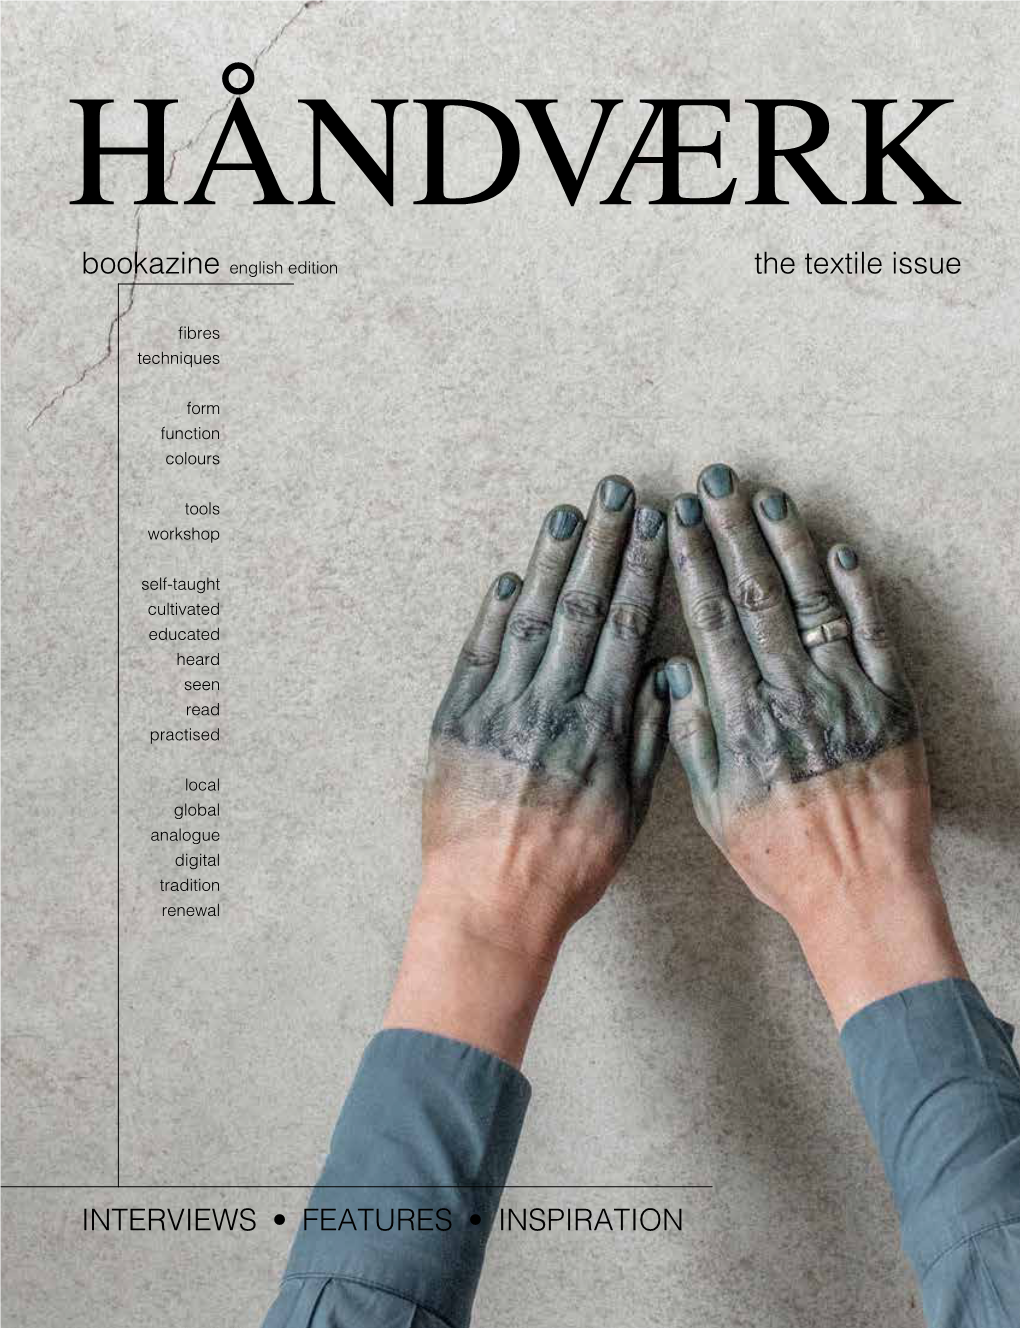 HÅNDVÆRK Bookazine English Edition the Textile Issue